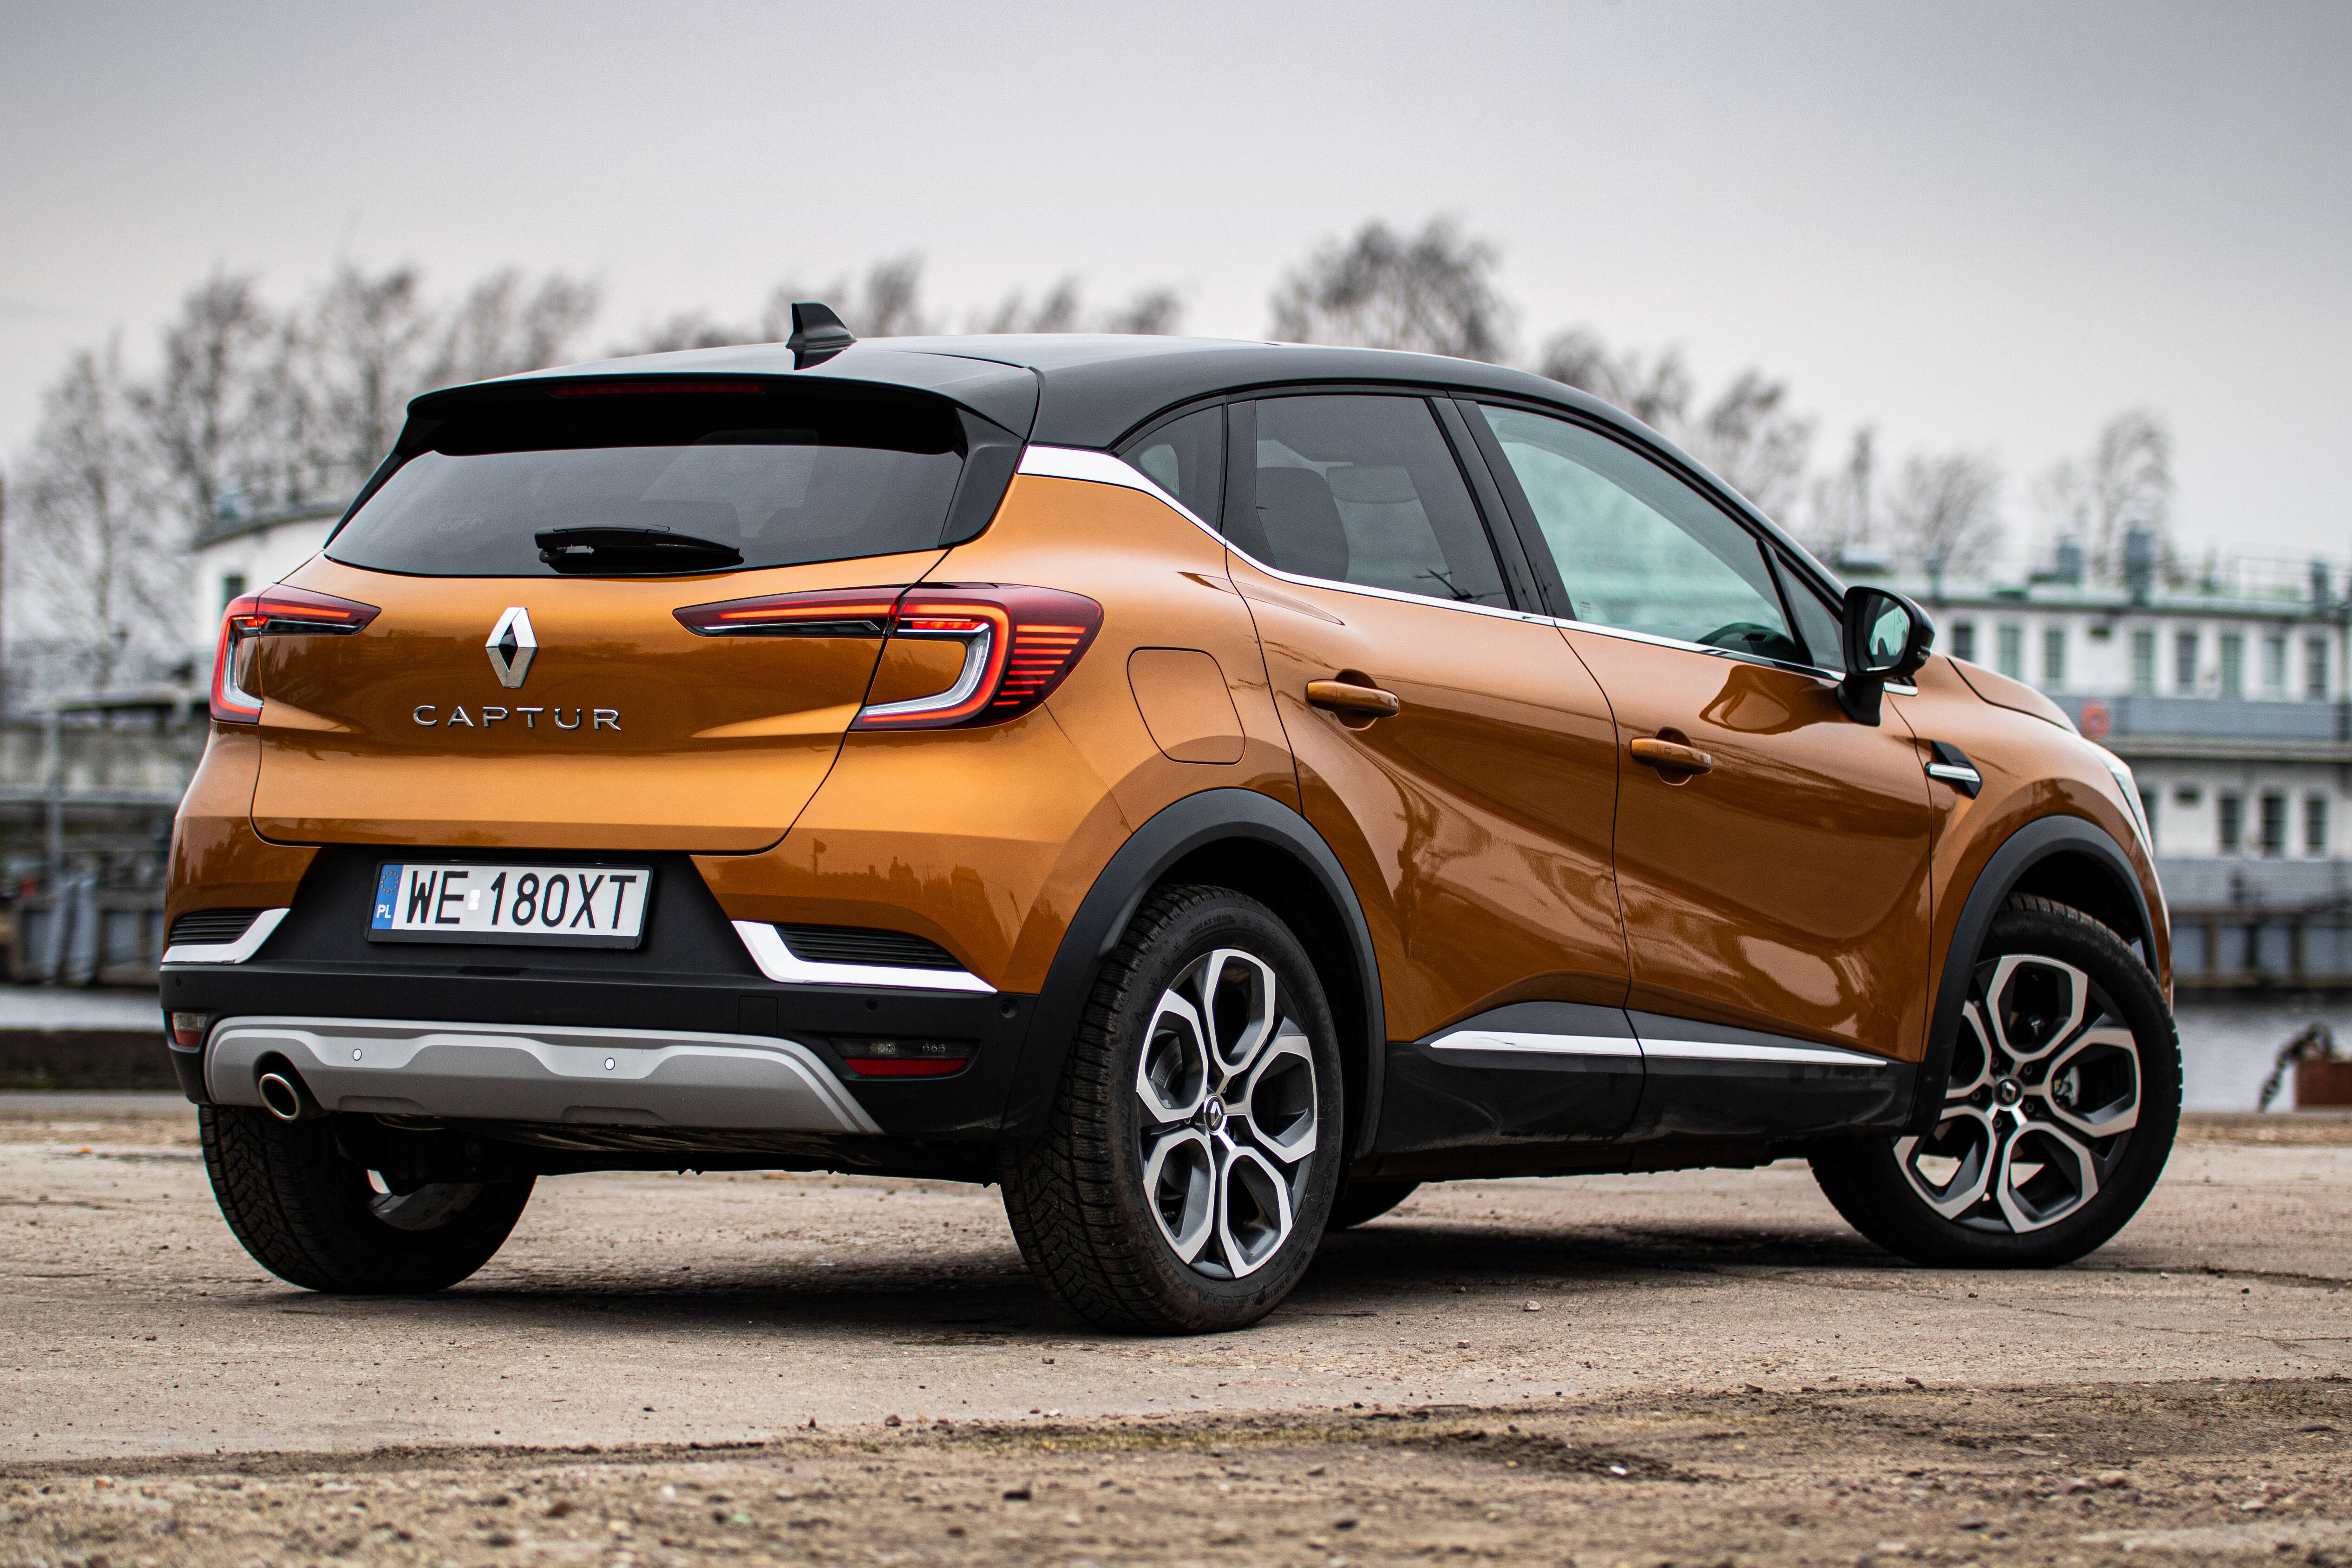 Renault Captur review: The ultimate car for every occasion